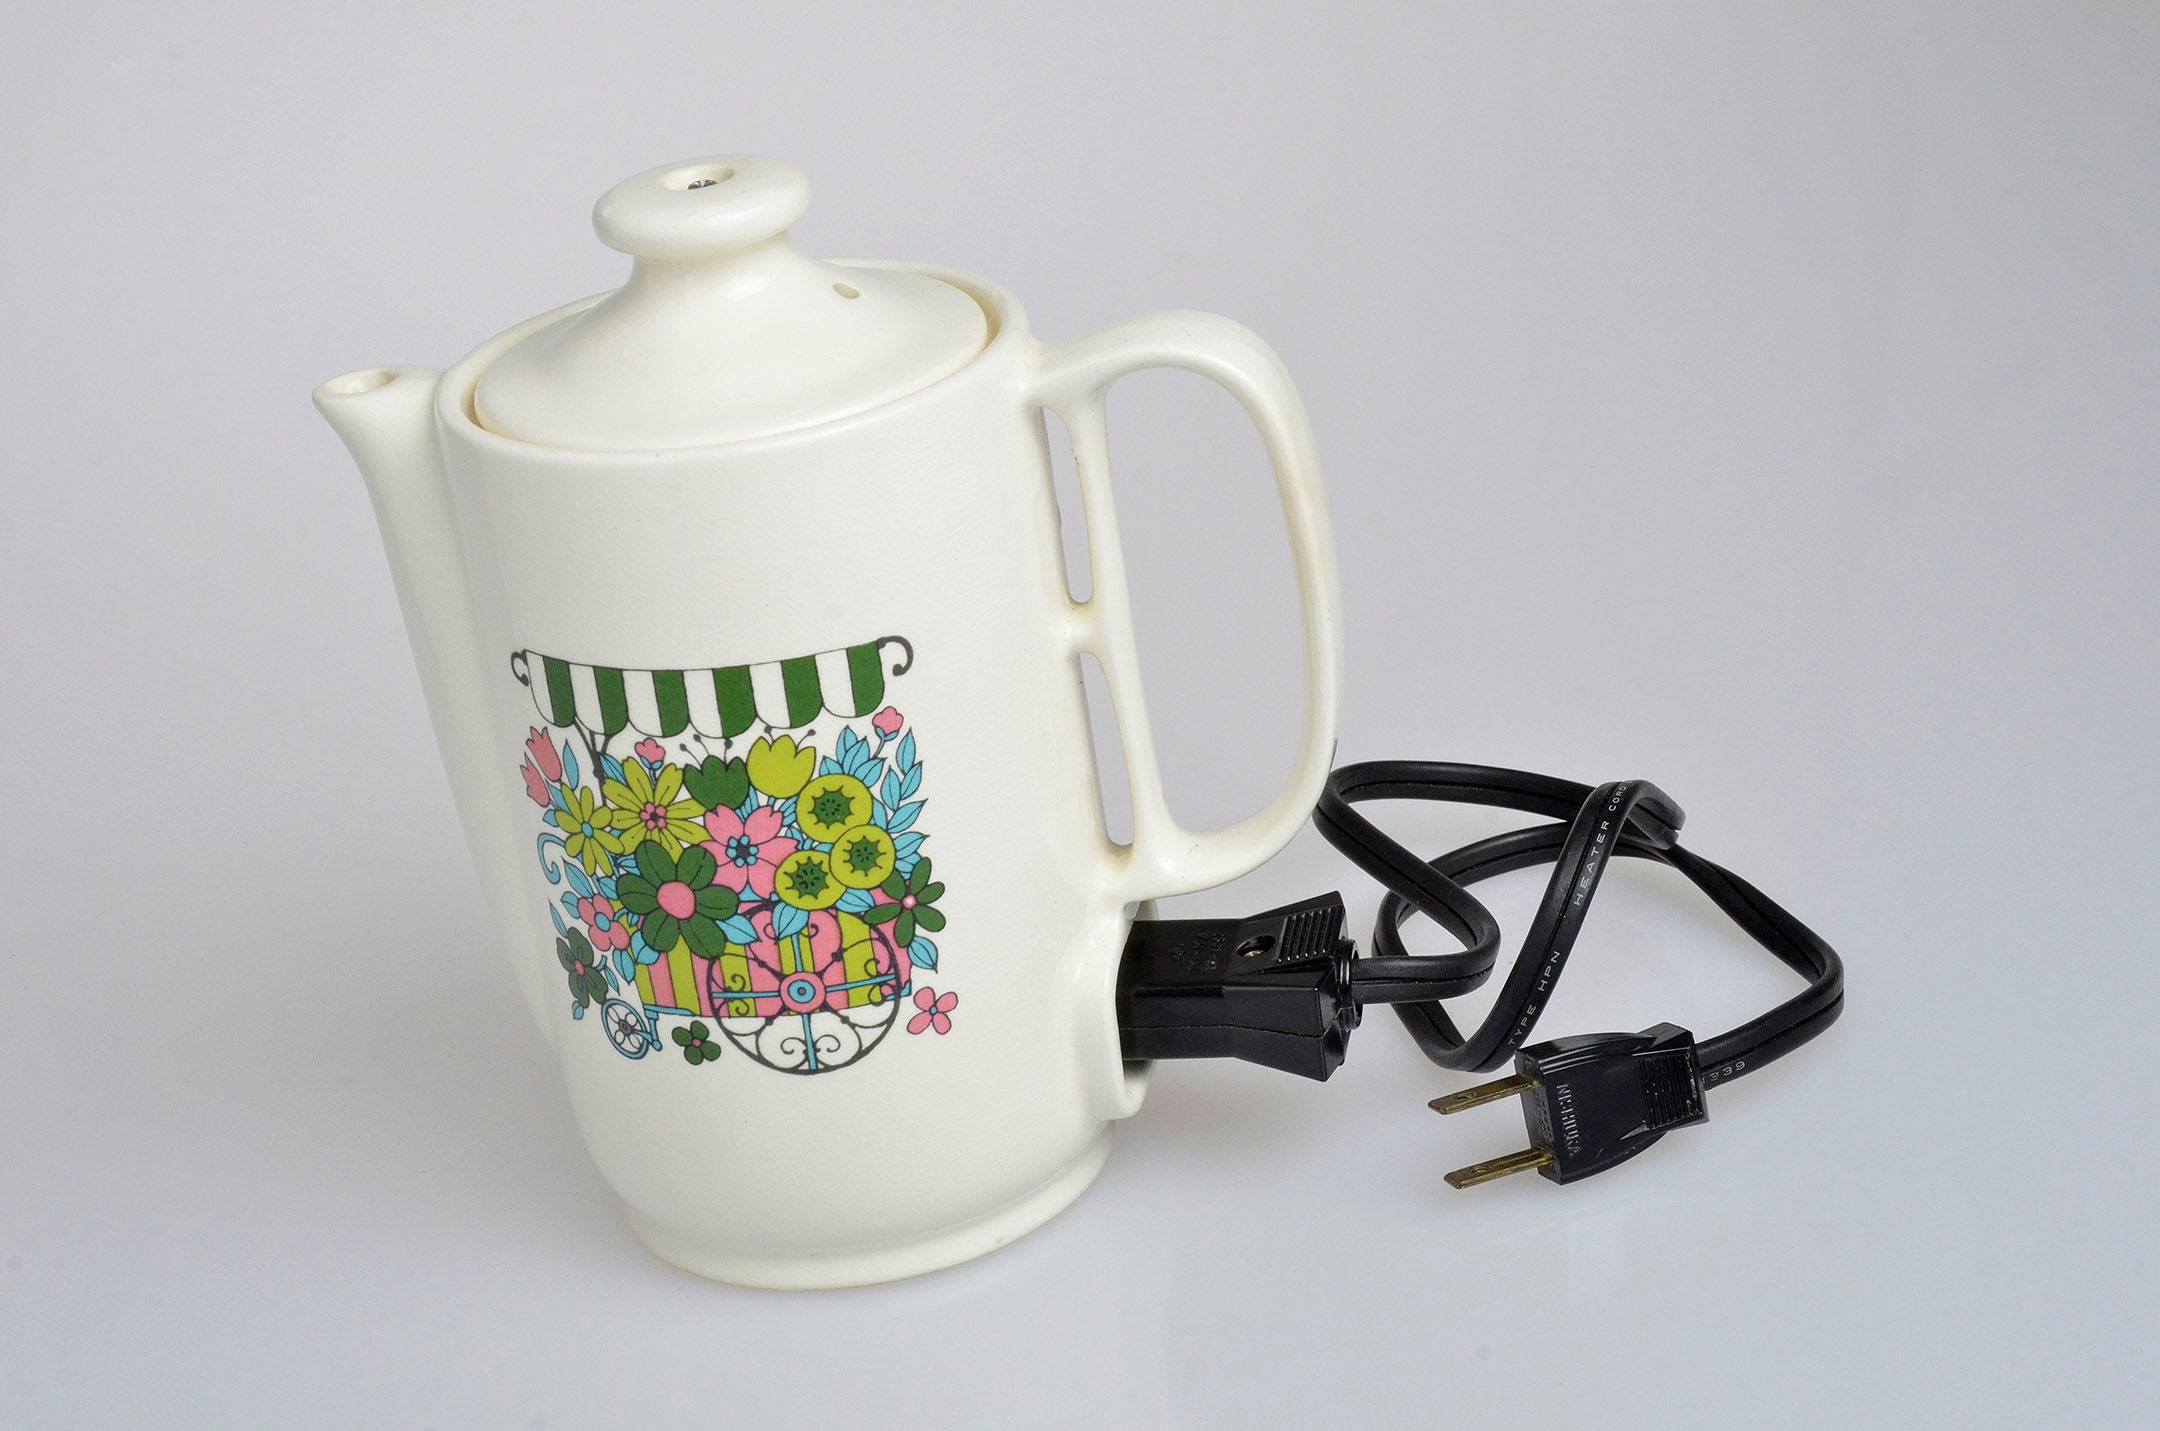 1960's Vintage SUPERIOR Electric Tea Kettle Model EK200-3 Made in Canada  CHROME Works Great Very Good Condition 